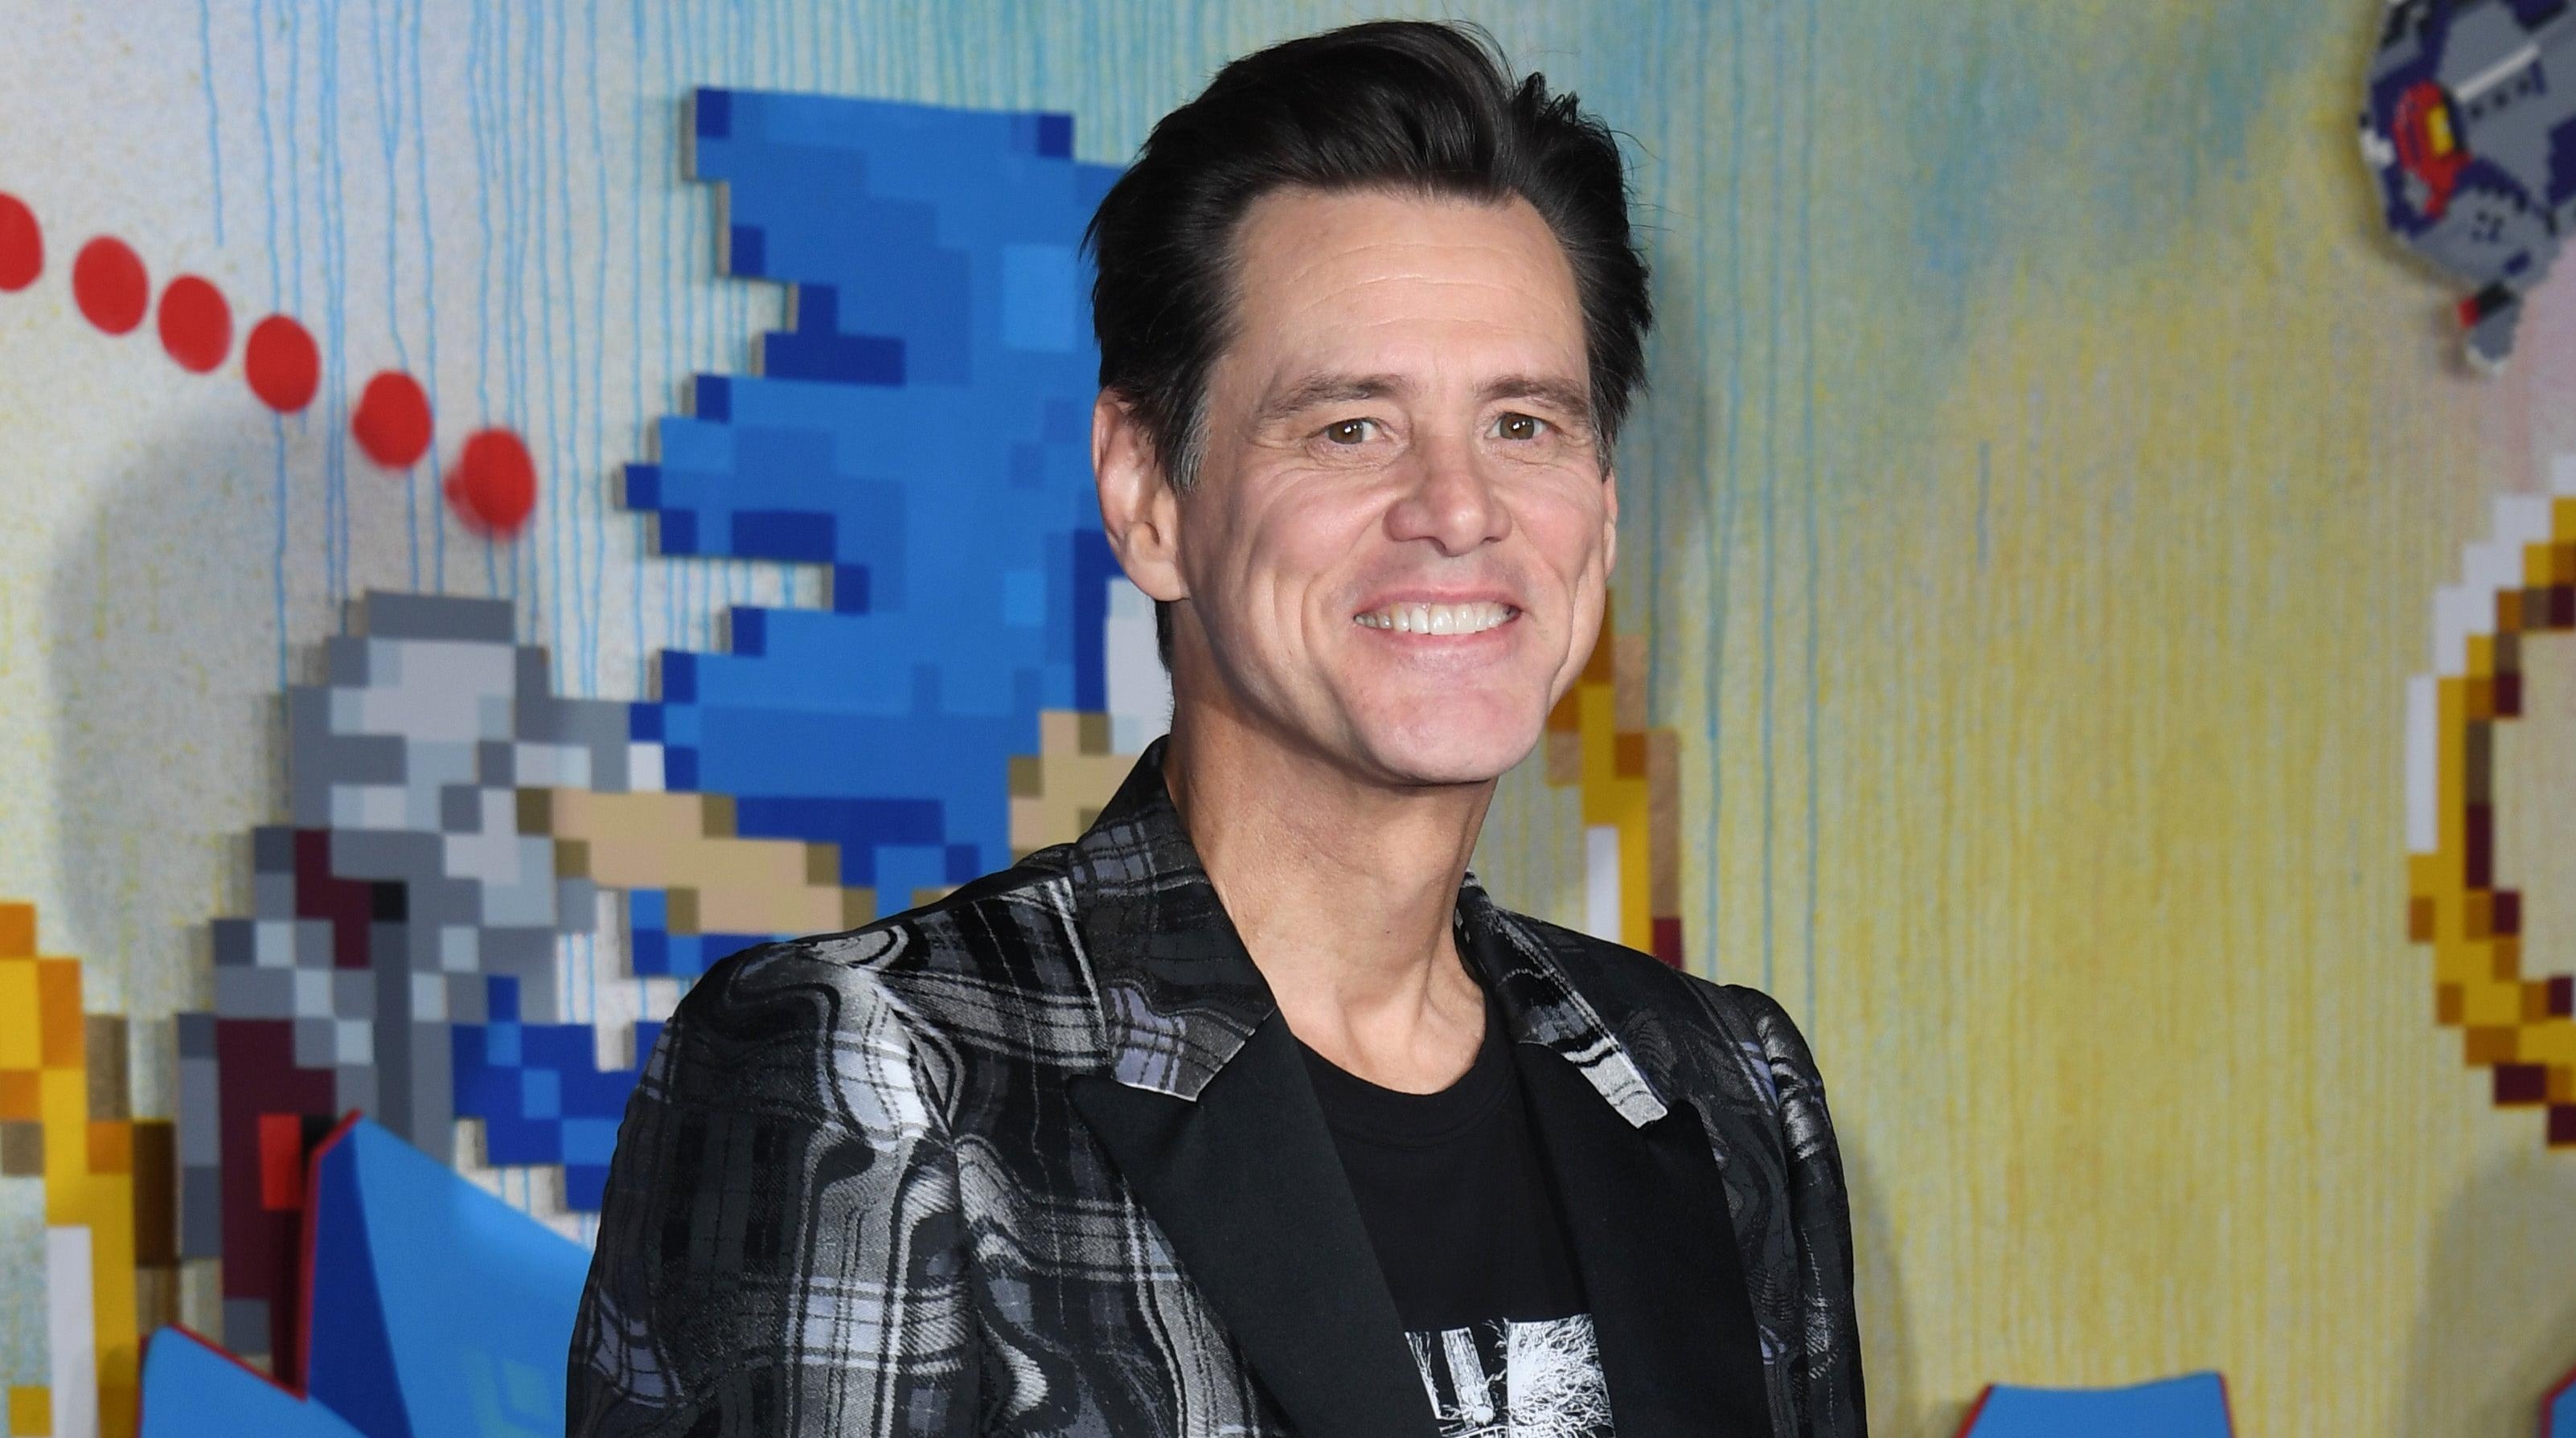 Jim Carrey says he’s “fairly serious” about wanting to retire after Sonic The Hedgehog 2